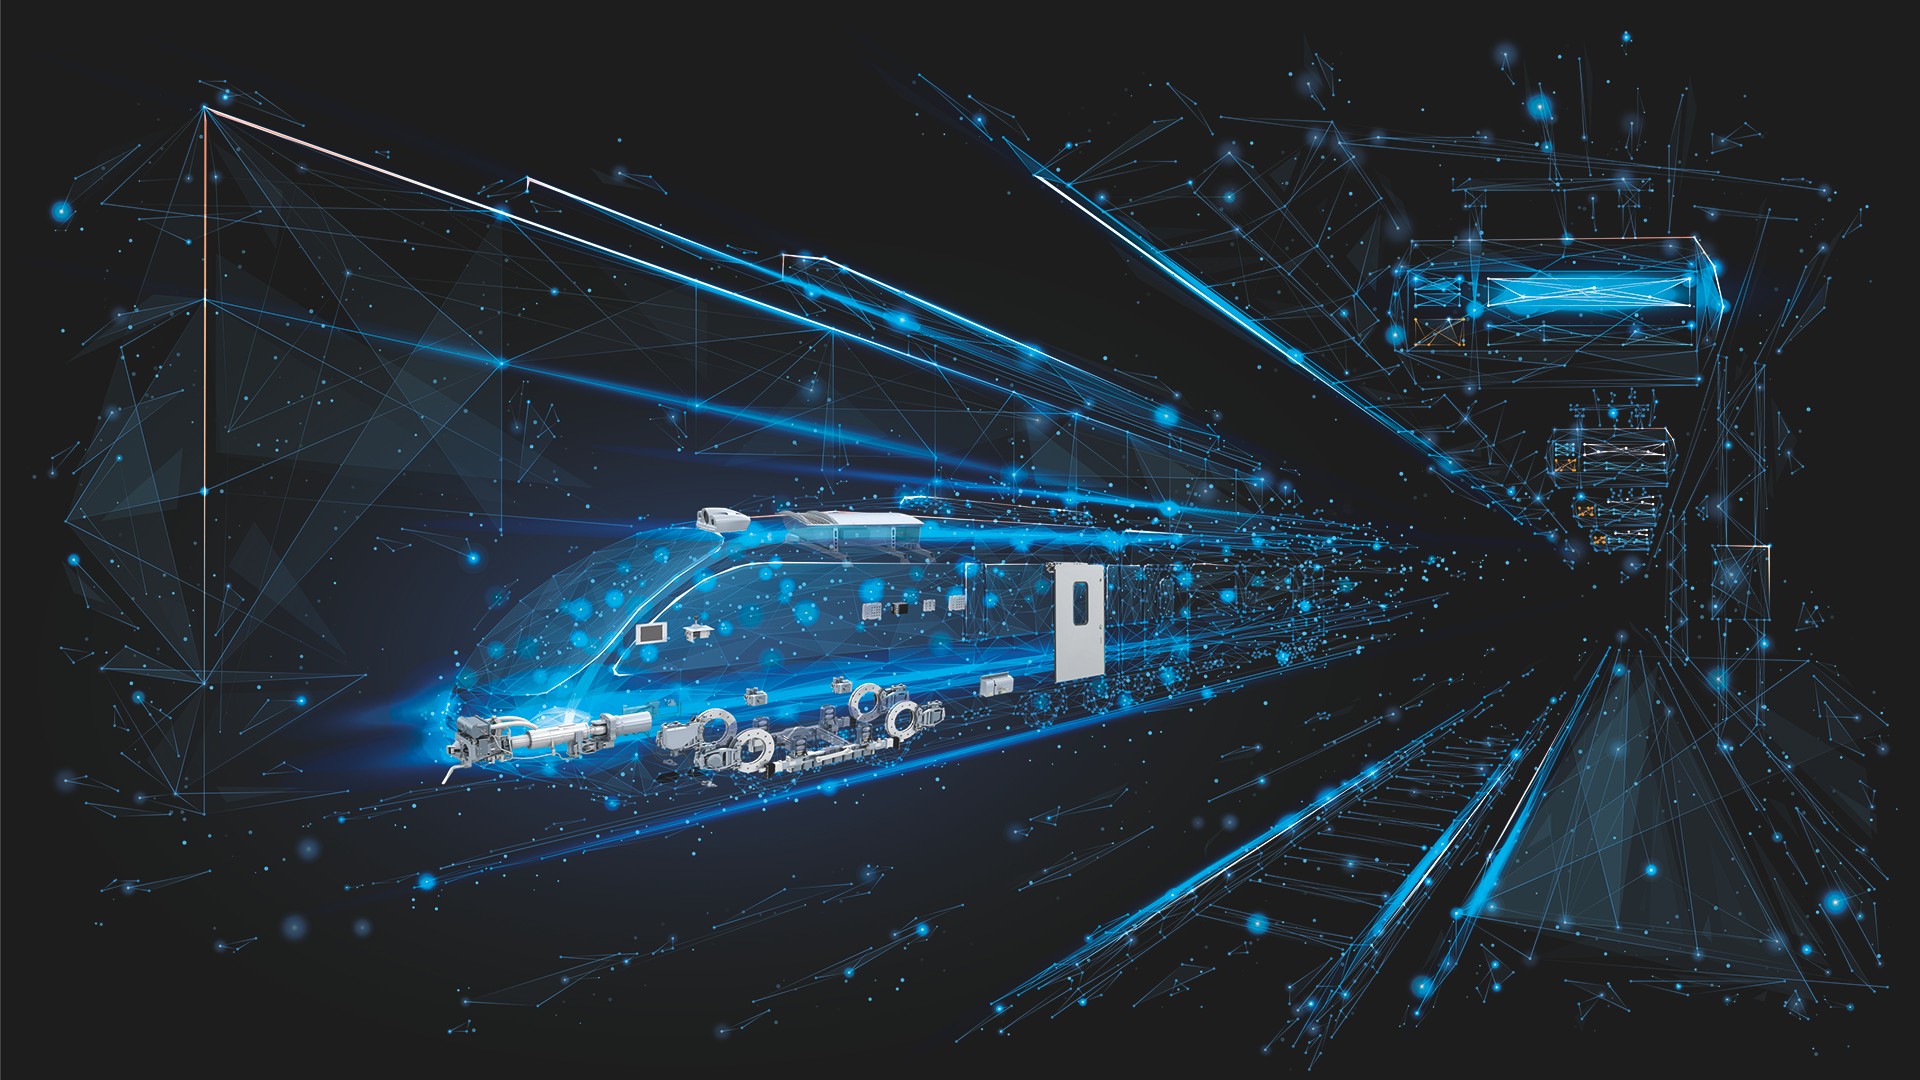 Connectivity between individual train components in Knorr-Bremse’s portfolio of digital solutions and features that can be combined to meet customer needs.